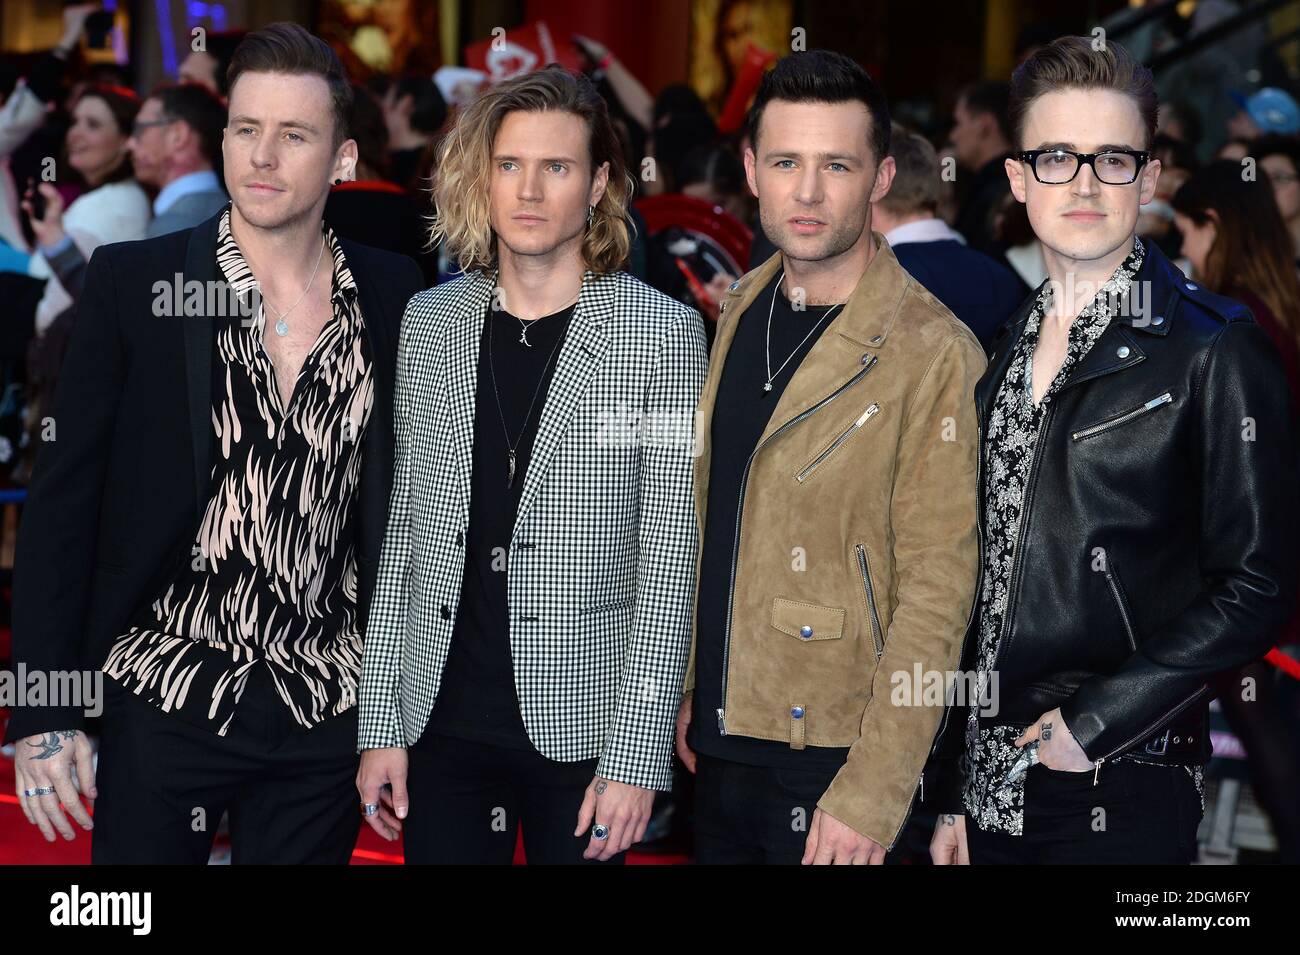 McFly (left to right) Dougie Poynter, Danny Jones, Harry Judd and Tom Fletcher arriving for the Captain America: Civil War European Premiere at the Vue Westfield, London. Tuesday 26th April 2016. Picture Credit Doug Peters EMPICS Entertainment  Stock Photo